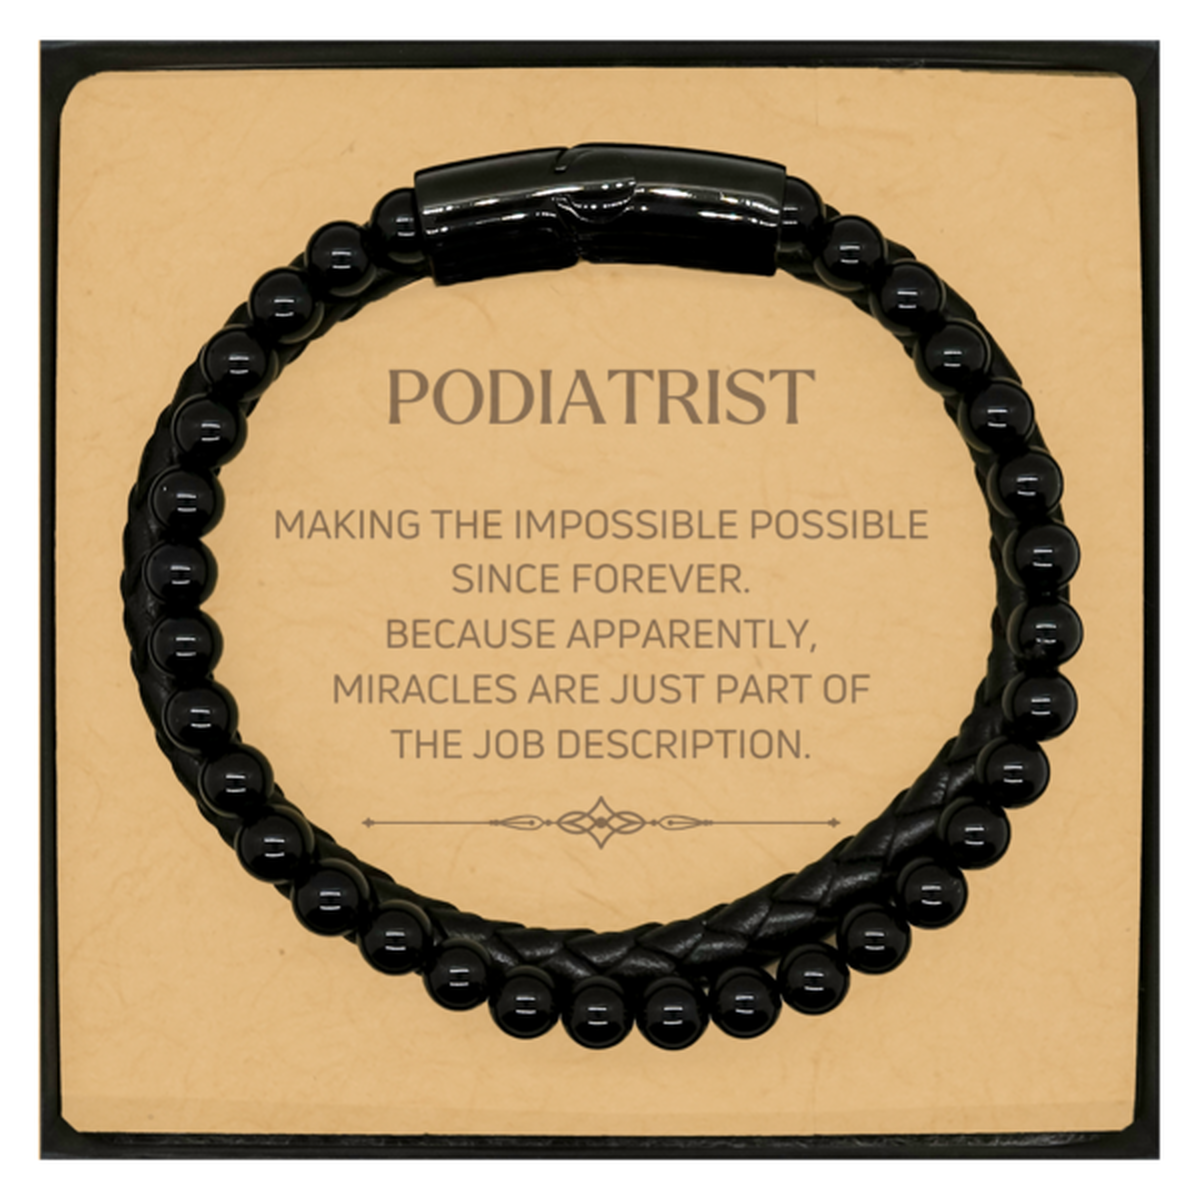 Funny Podiatrist Gifts, Miracles are just part of the job description, Inspirational Birthday Christmas Stone Leather Bracelets For Podiatrist, Men, Women, Coworkers, Friends, Boss